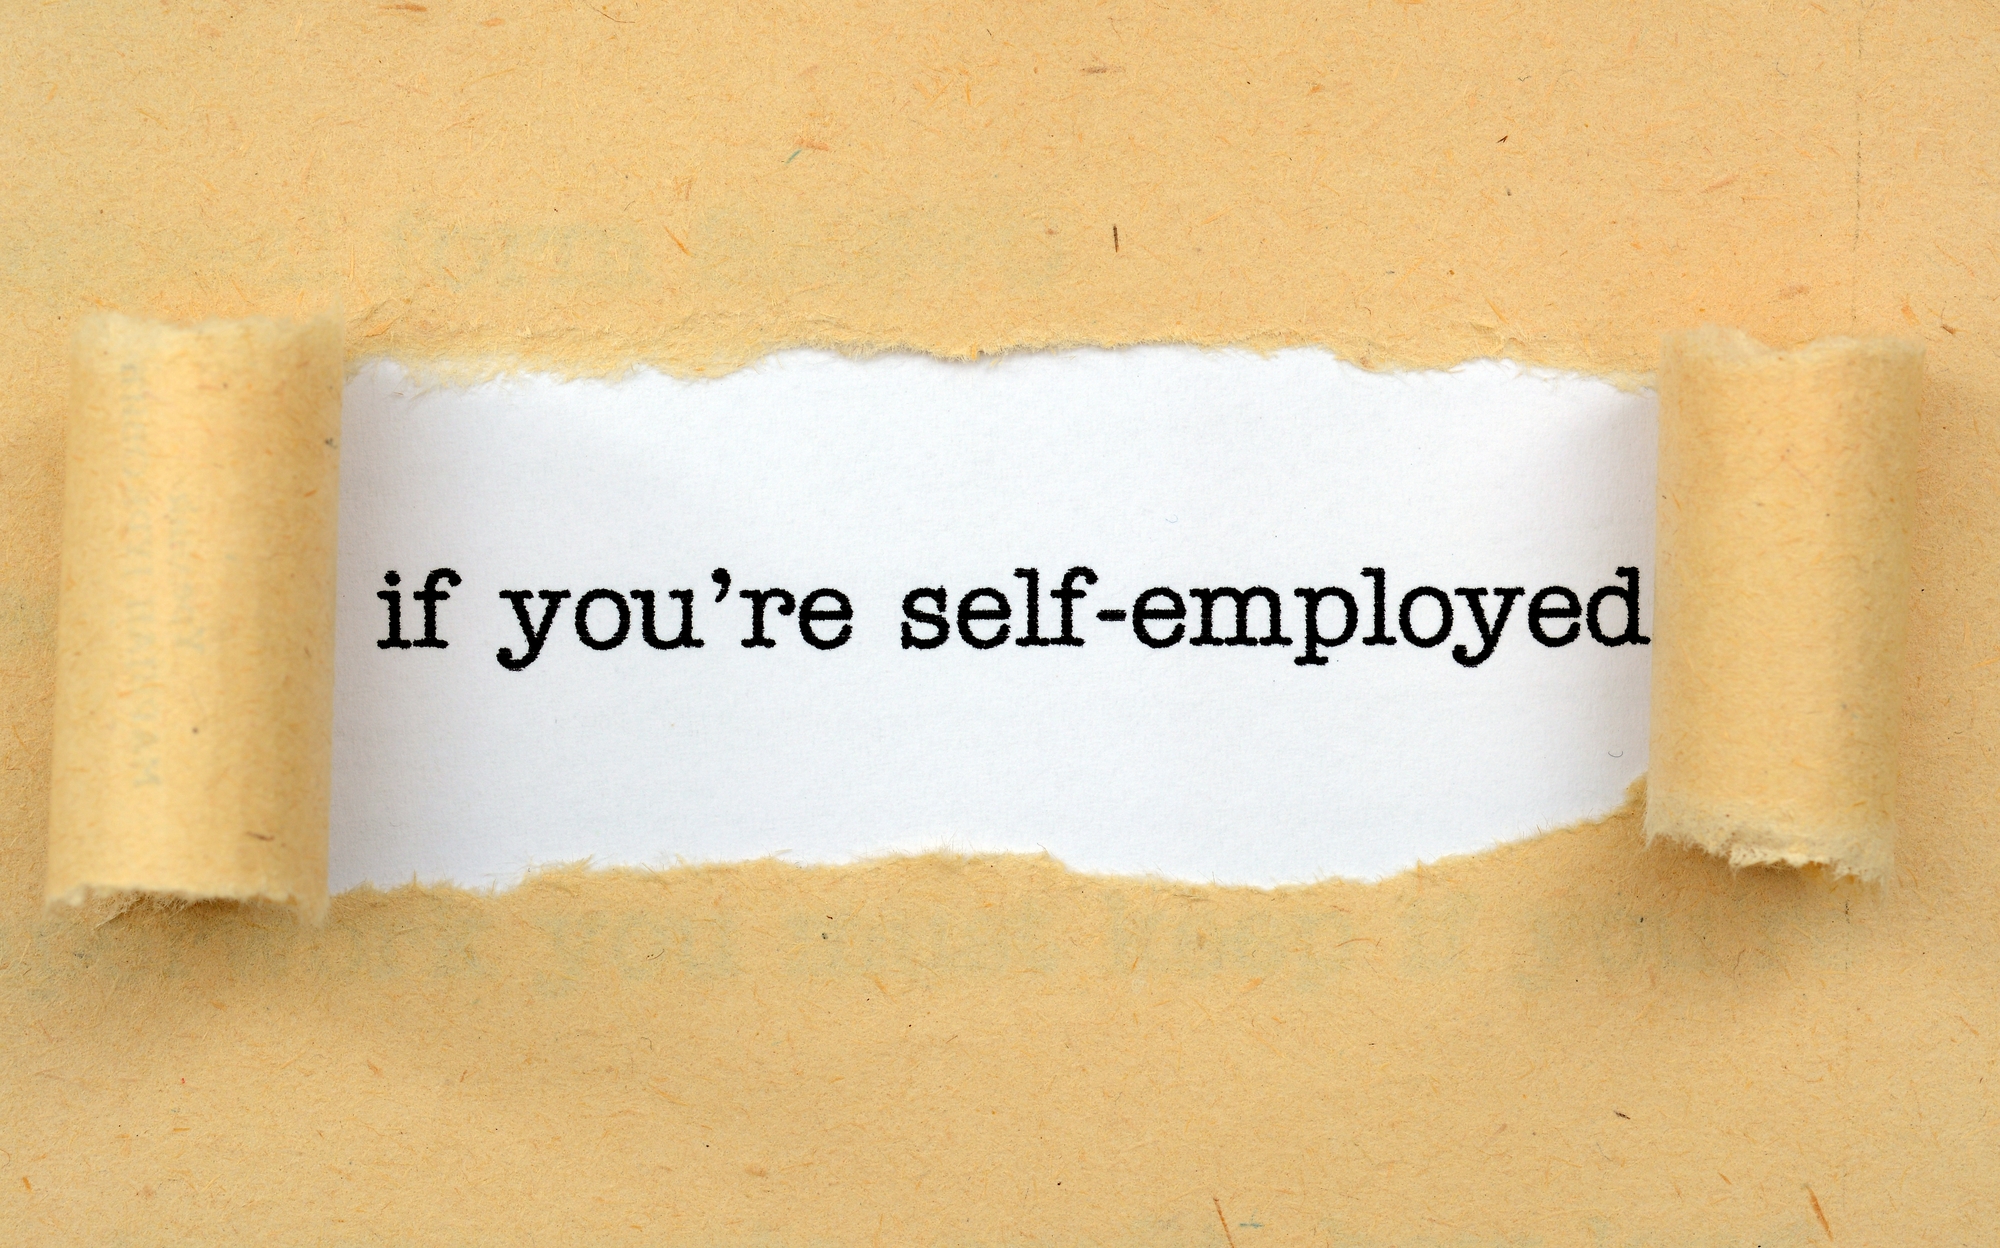 COVID-19-Related Breaks for Self-Employed